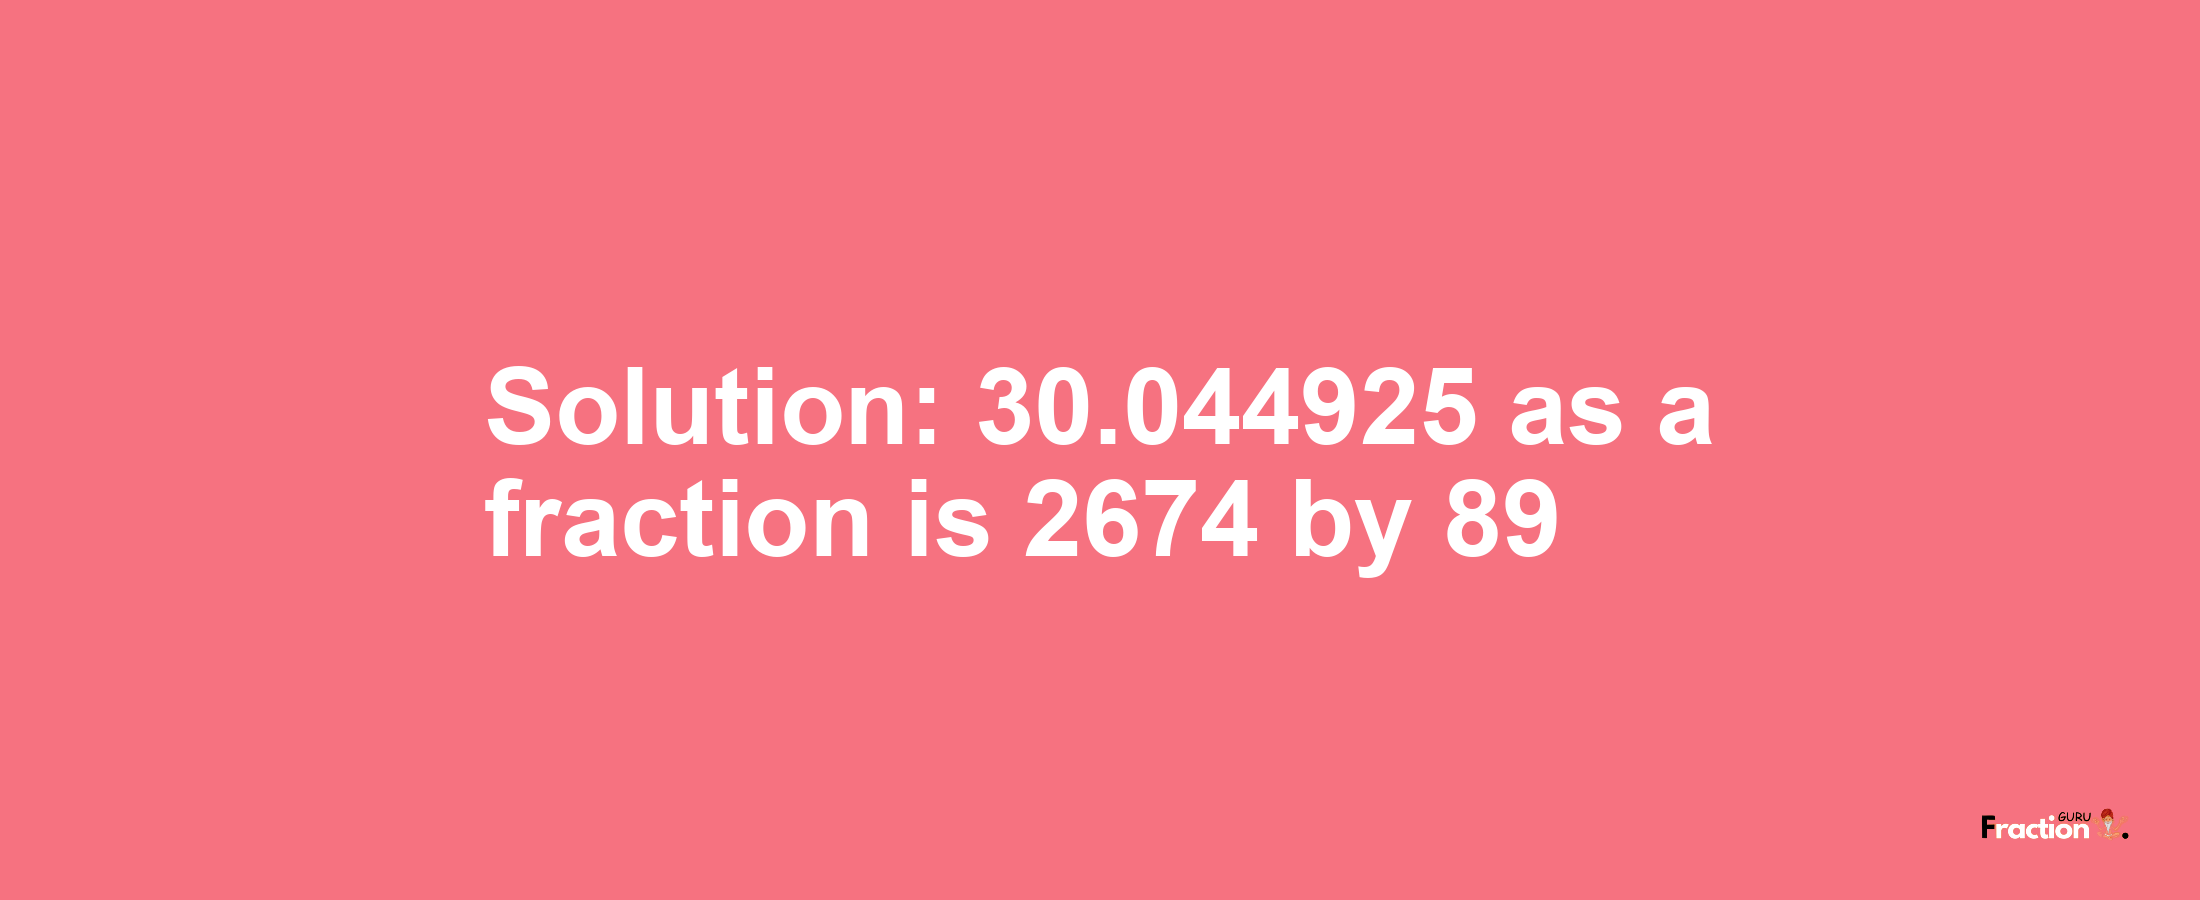 Solution:30.044925 as a fraction is 2674/89